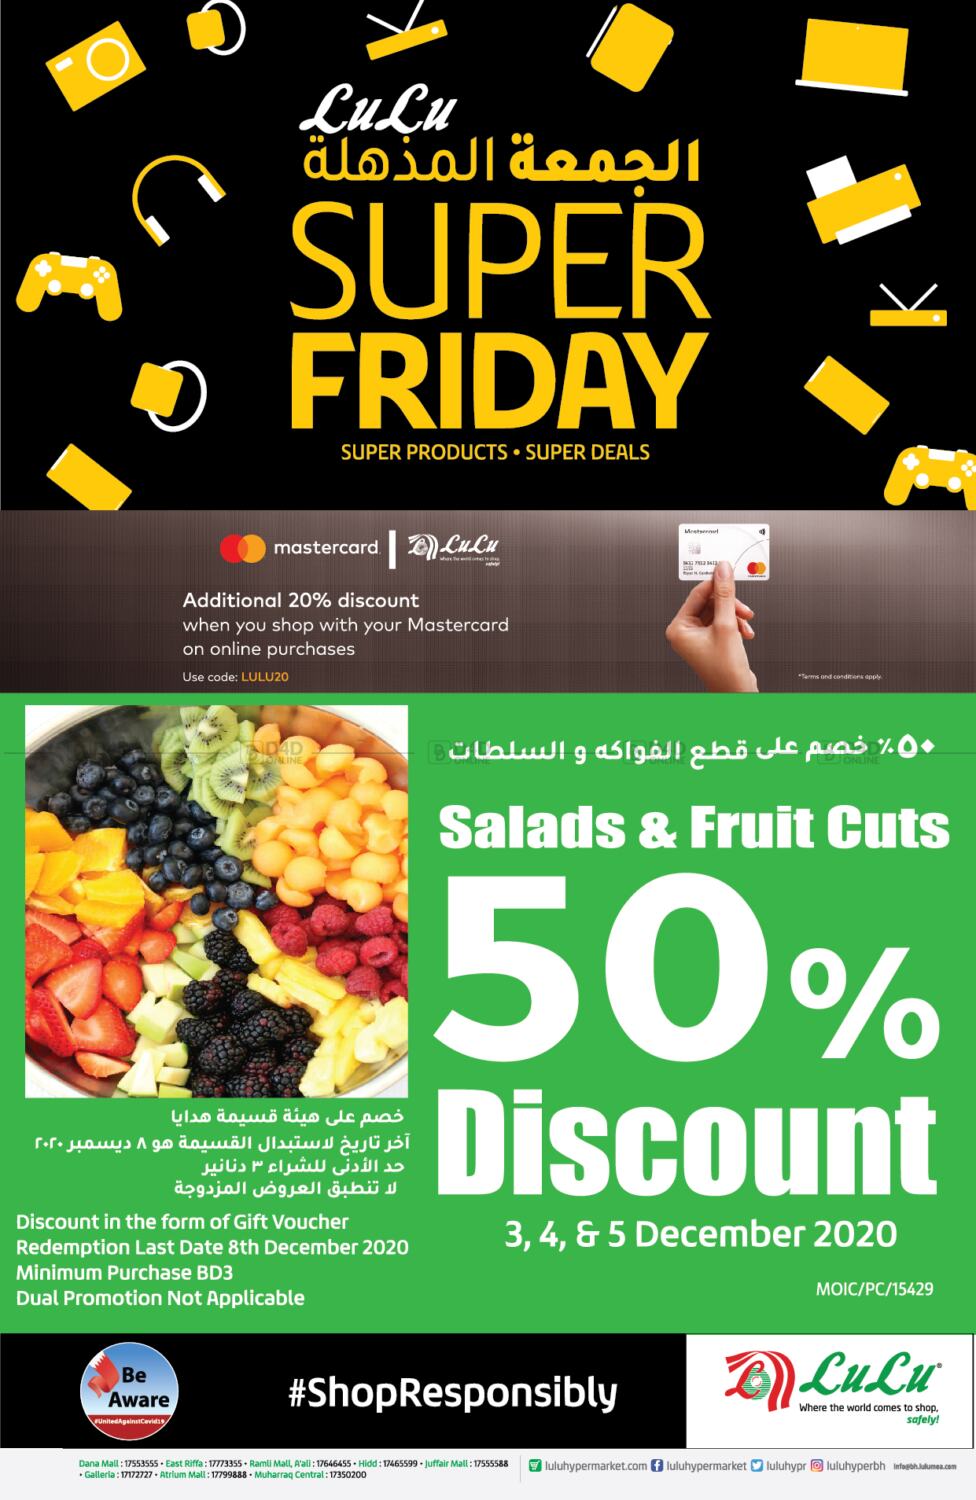 Gear up for Super Friday at Lulu Mall Hyderabad! This weekend